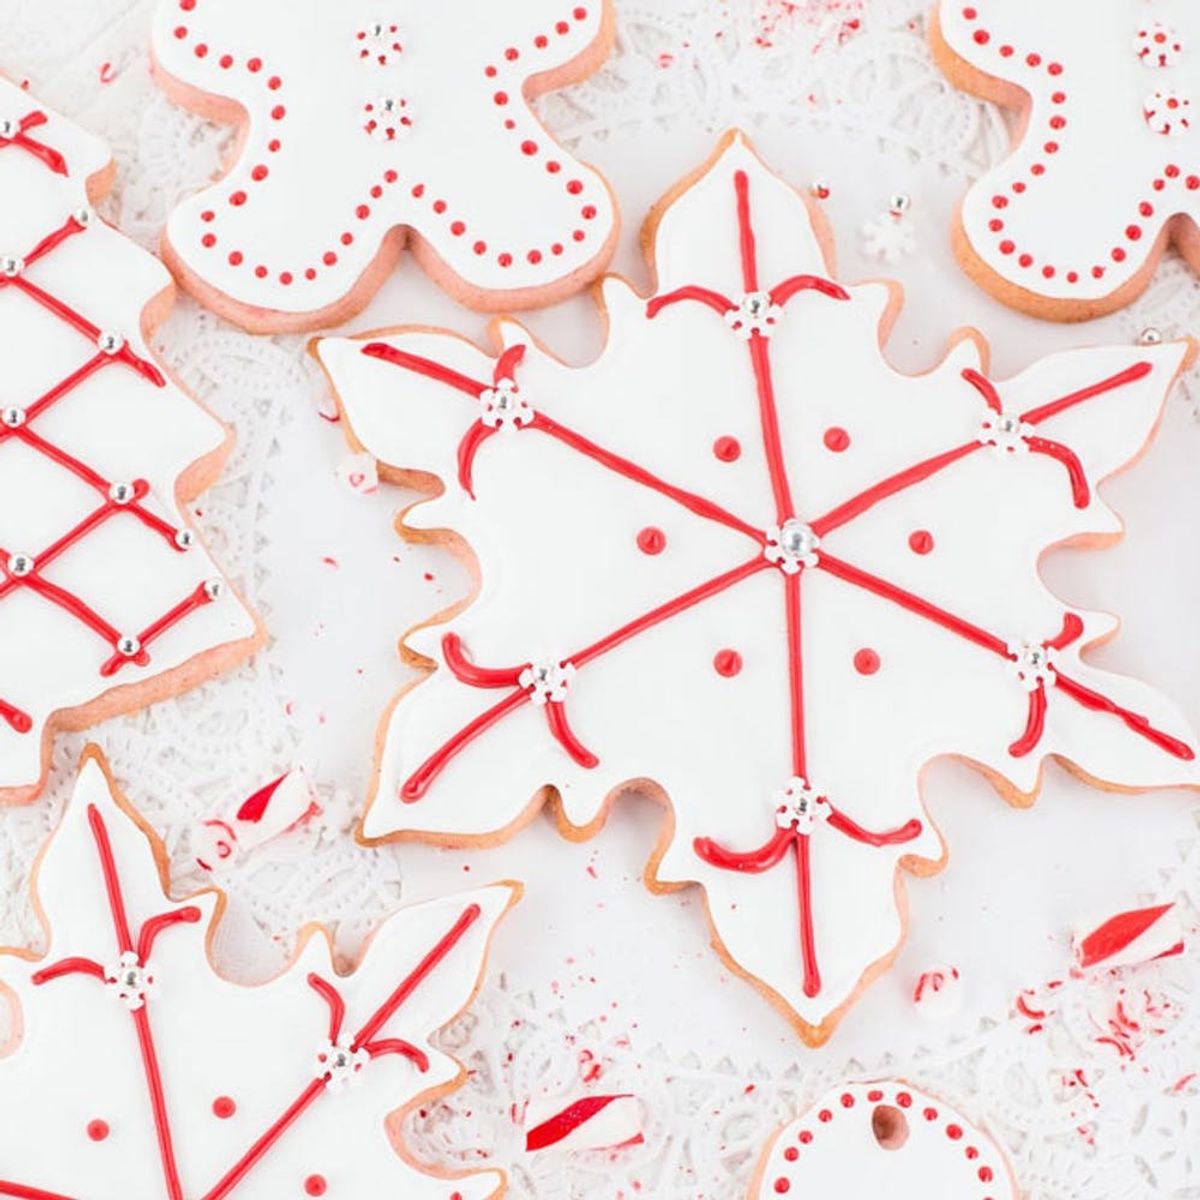 16 Christmas Sugar Cookie Recipes to WOW Guests Through the Holidays